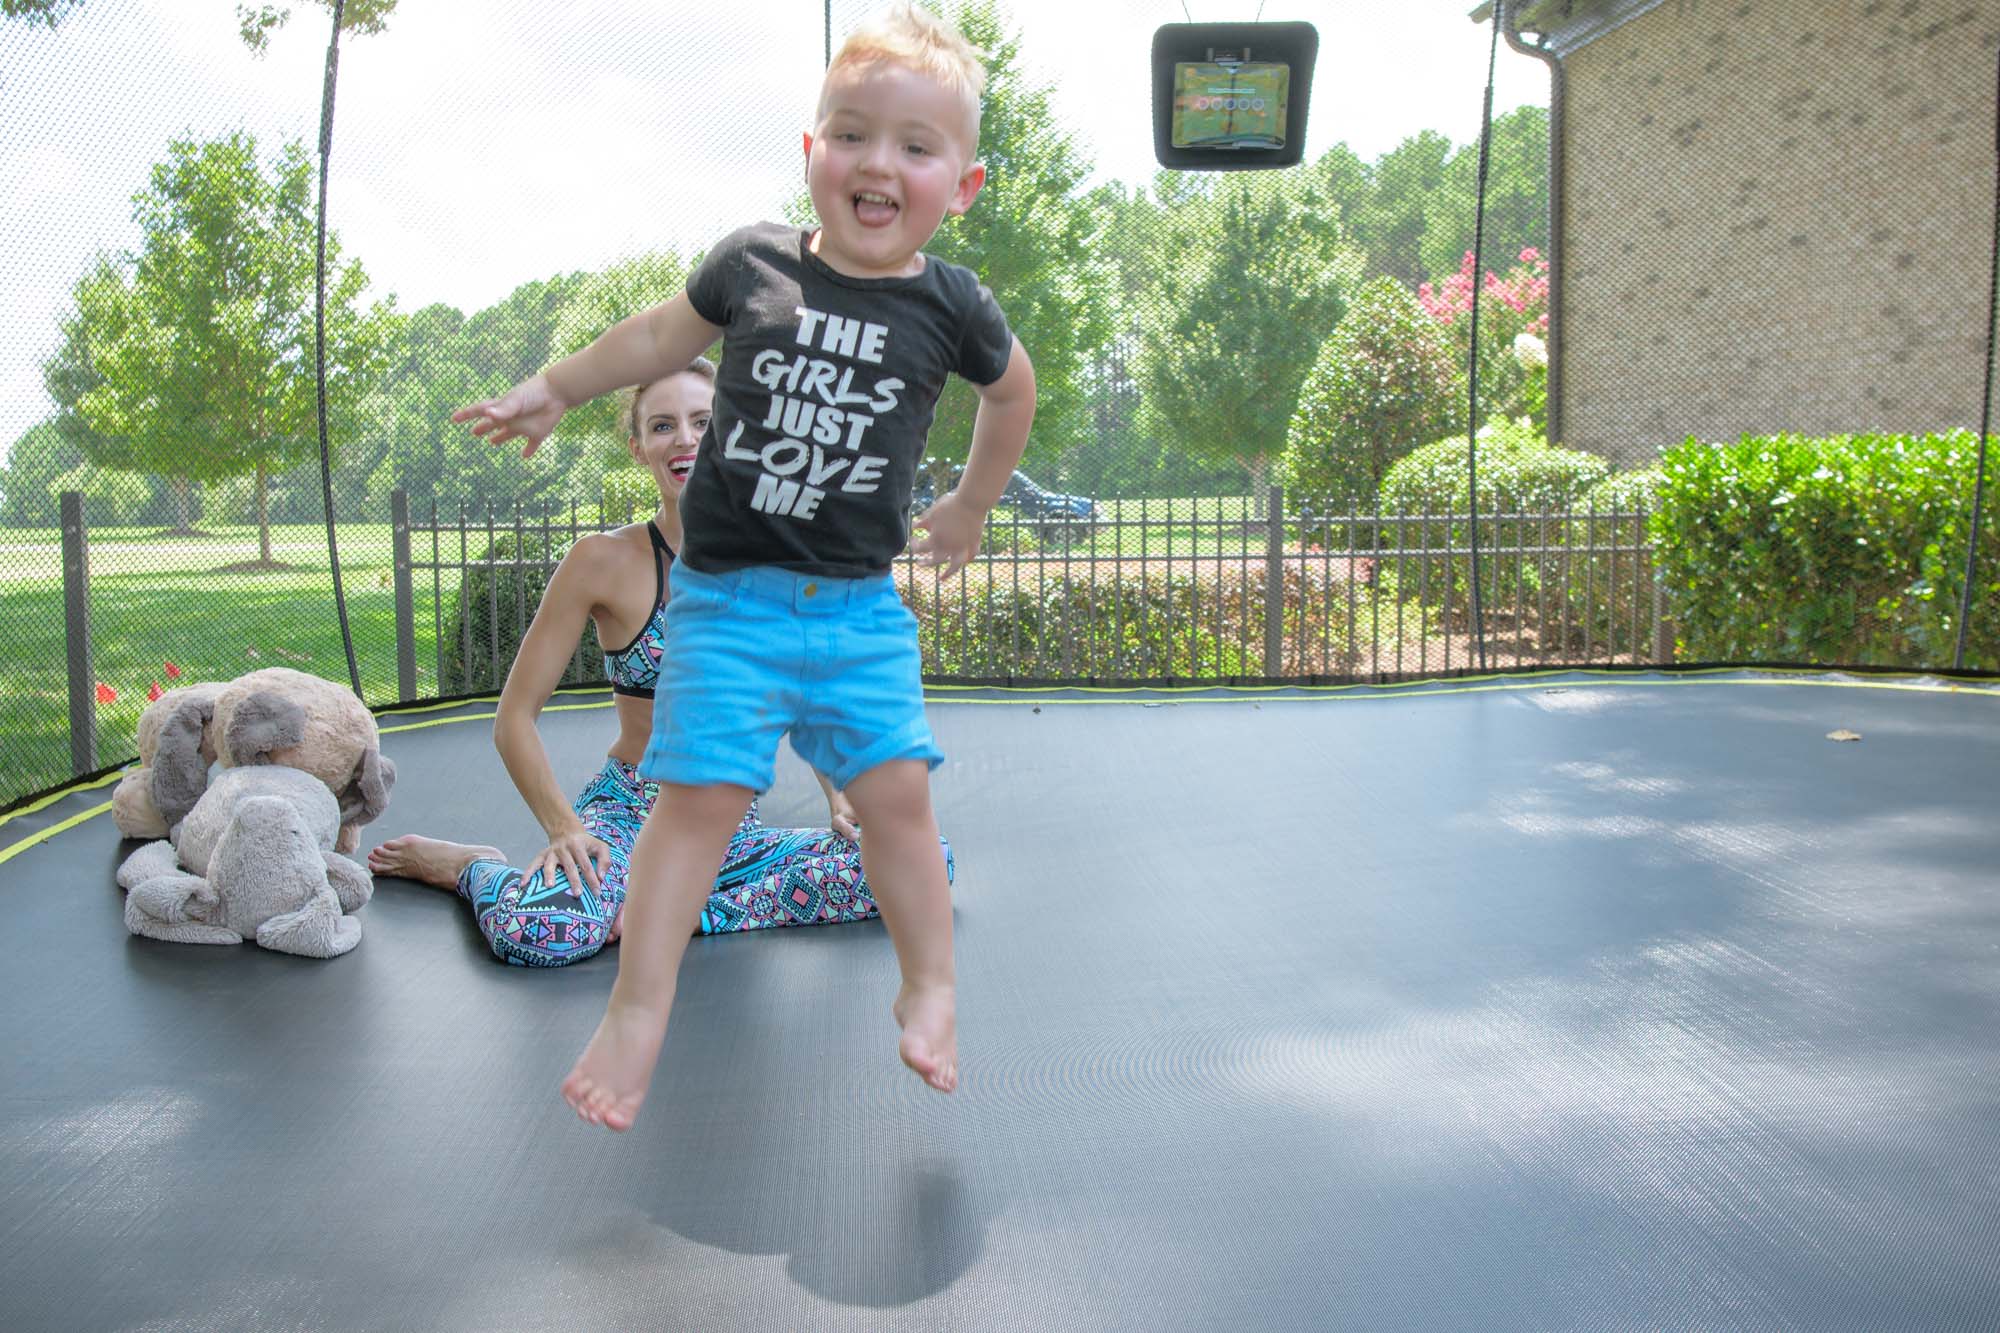 Jumping for Joy with Springfree Trampoline